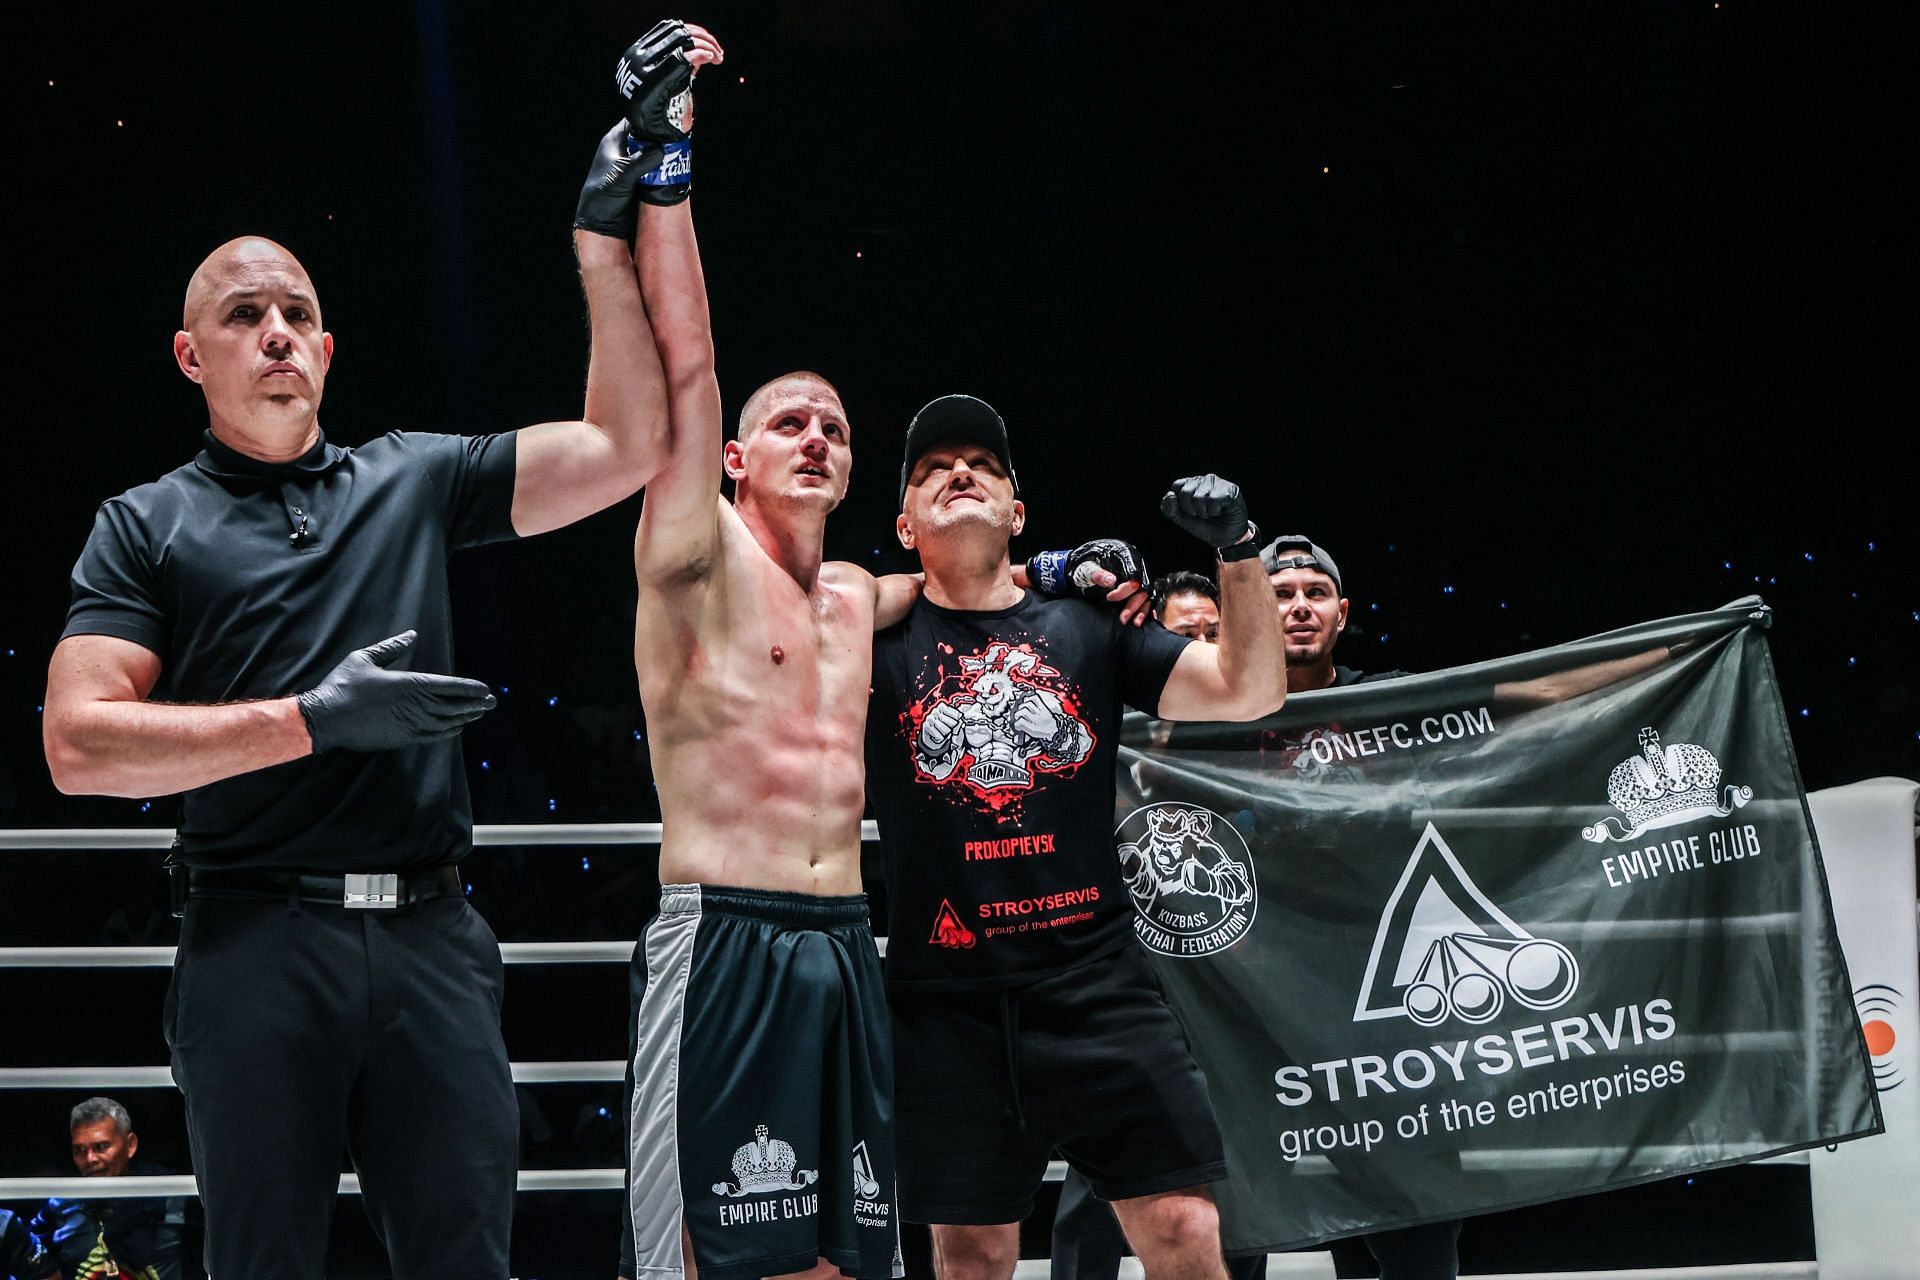 Dmitry Menshikov celebrates with his team after defeating Sinsamut Klinmee.